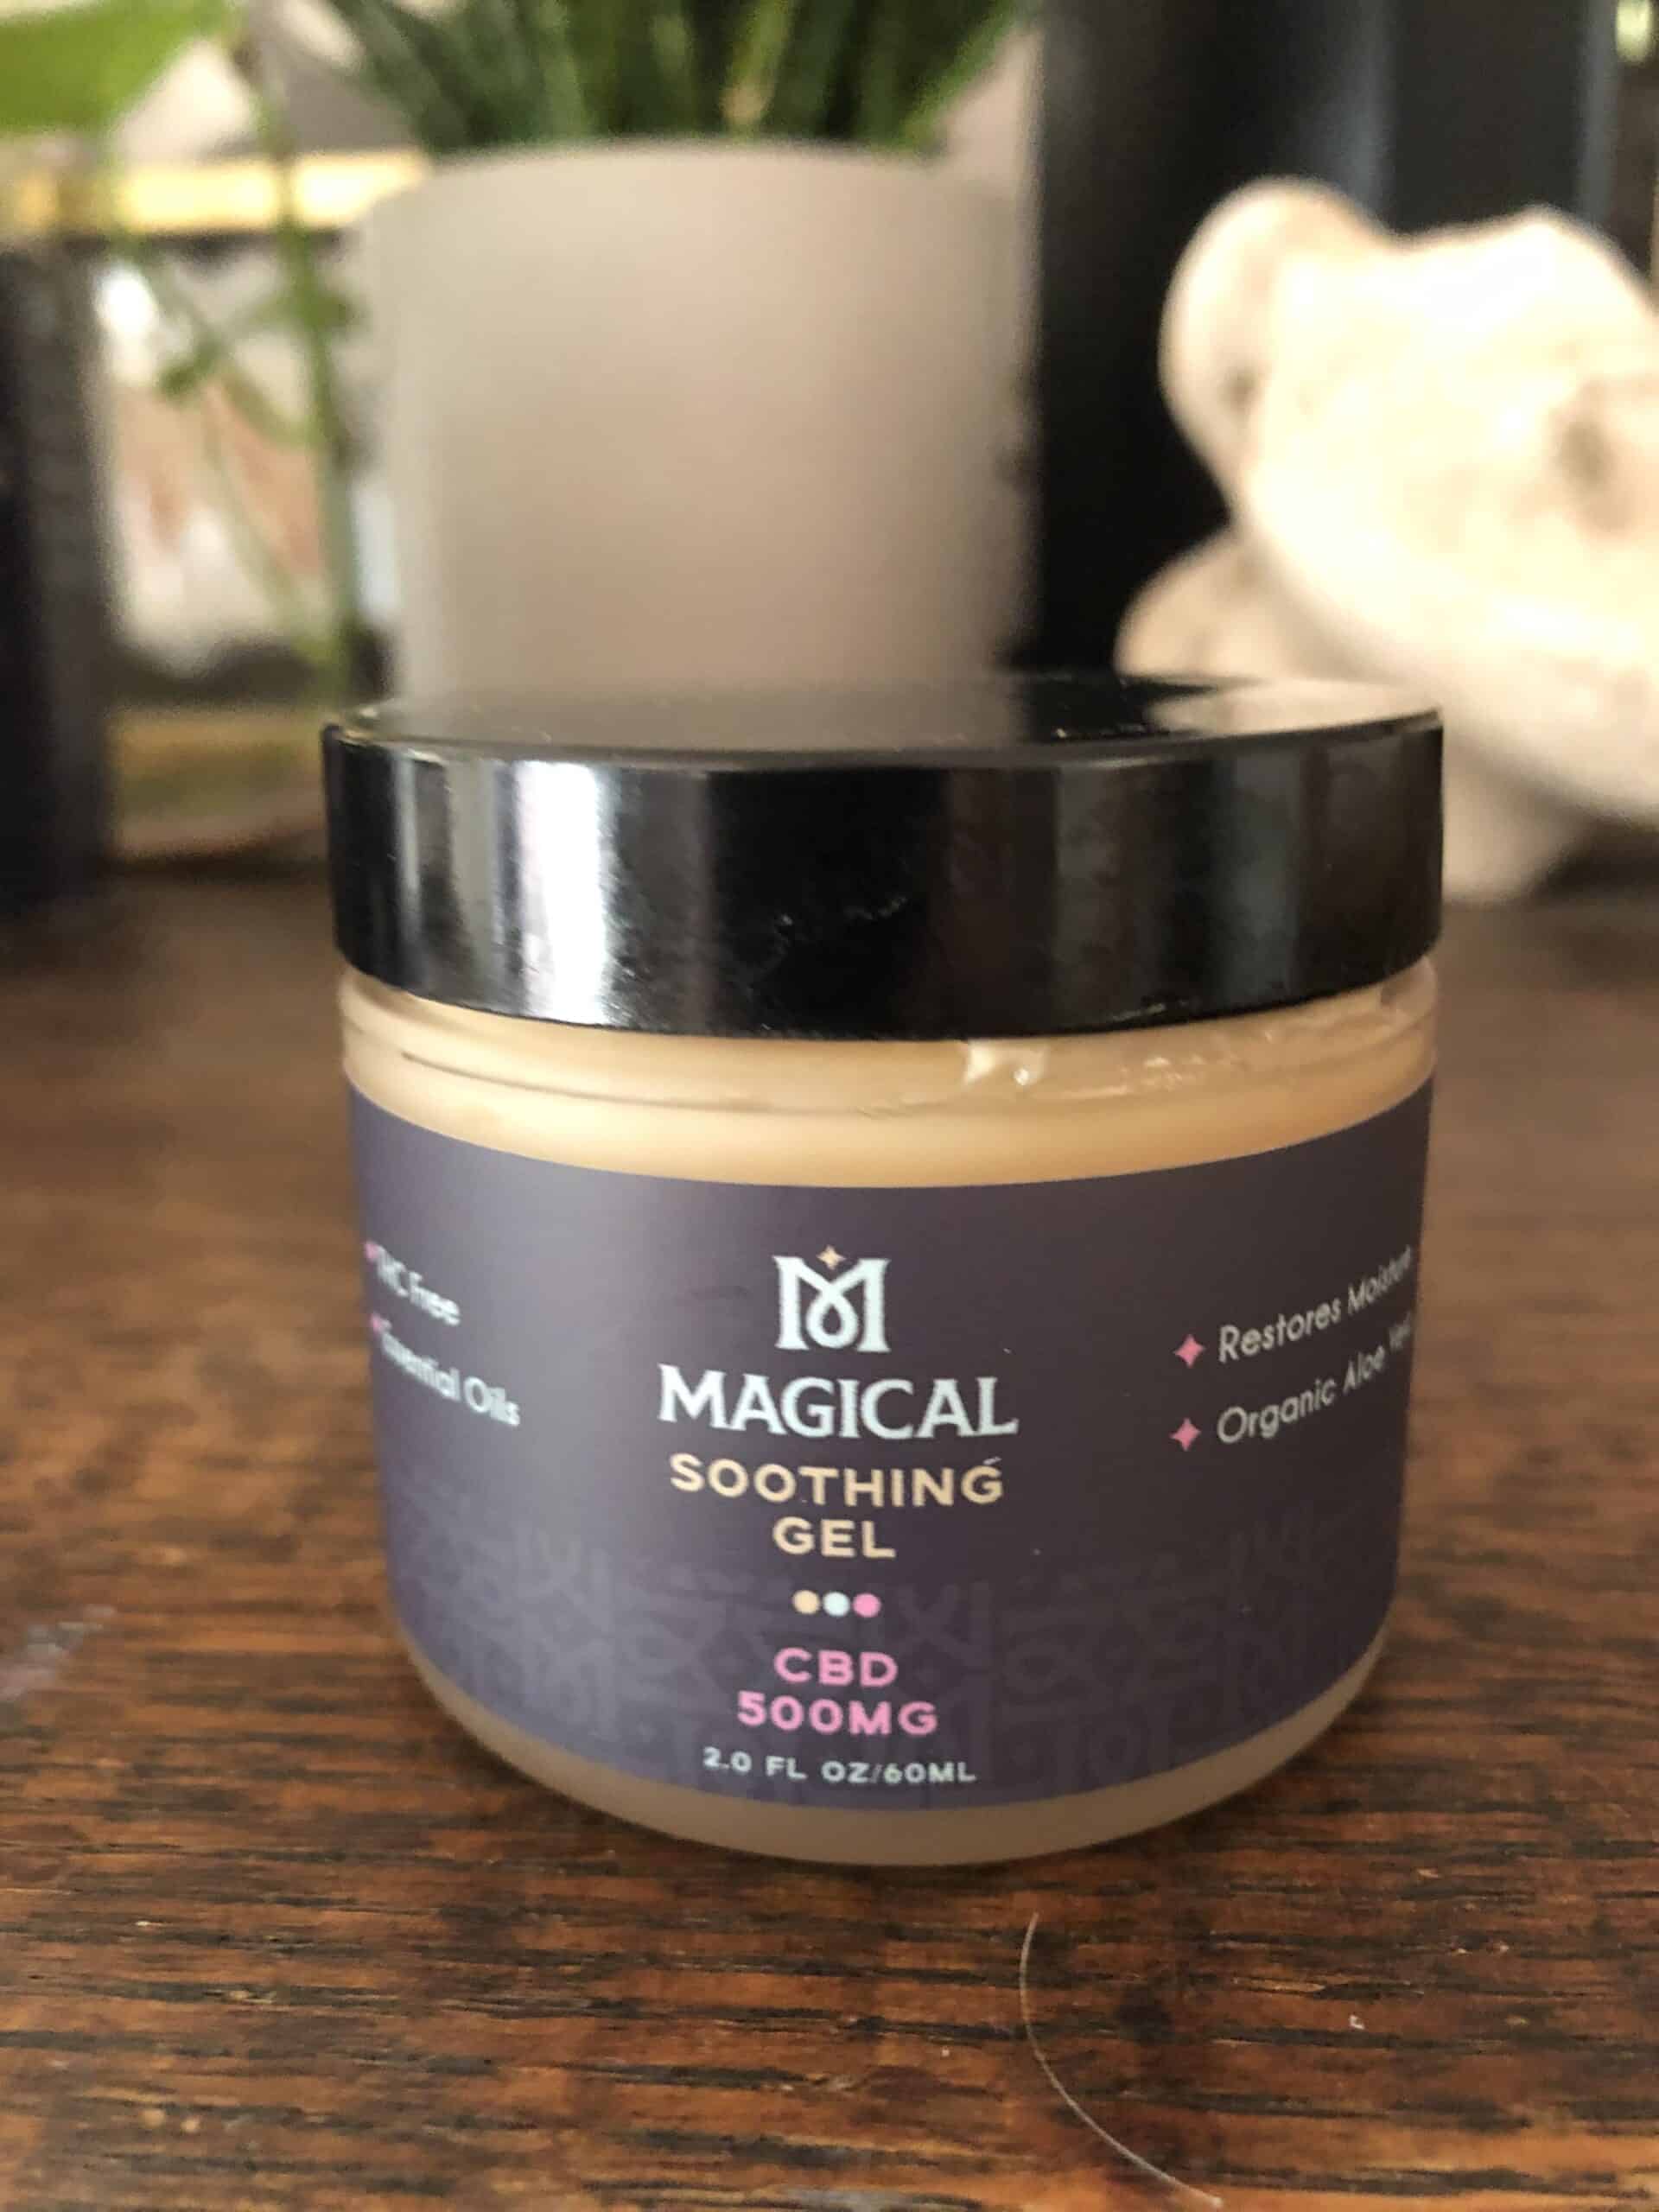 Magical CBD Soothing Gel Save On Cannabis Review Beauty Shot